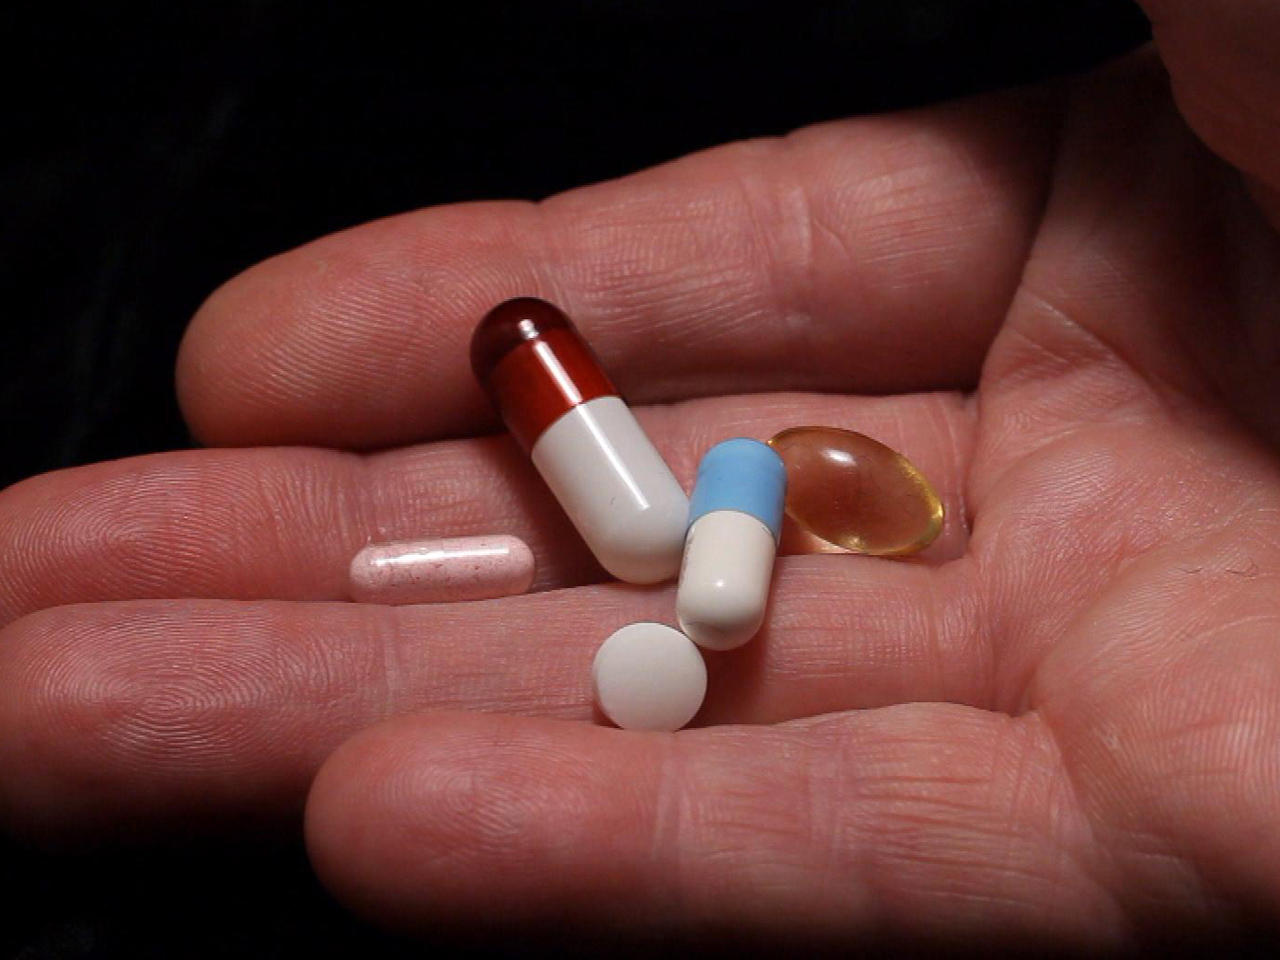 Why do placebos work? - CBS News